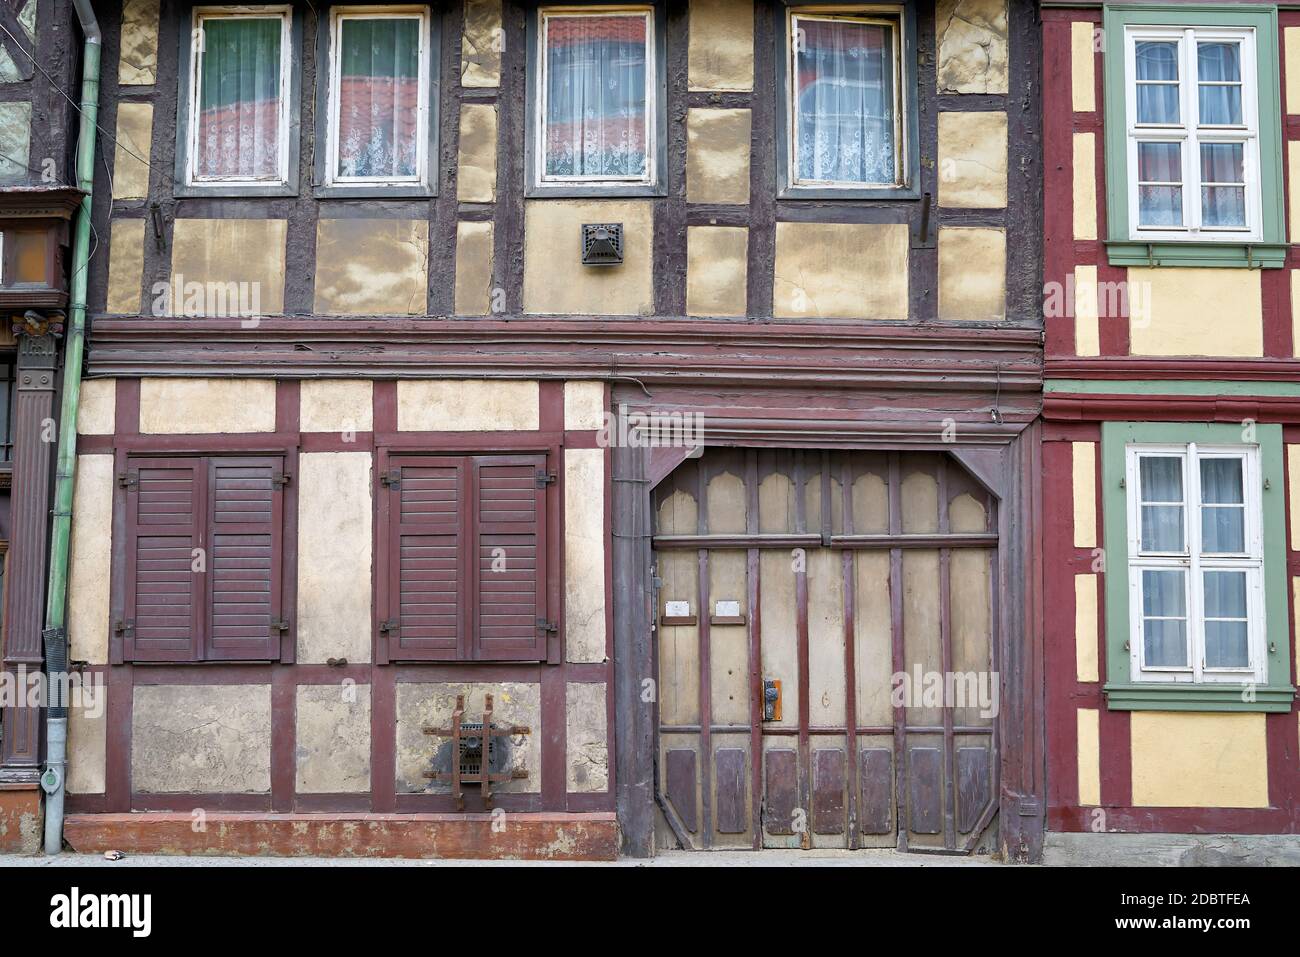 old half-timbered house in need of renovation in the old town of Wernigerode in Germany Stock Photo